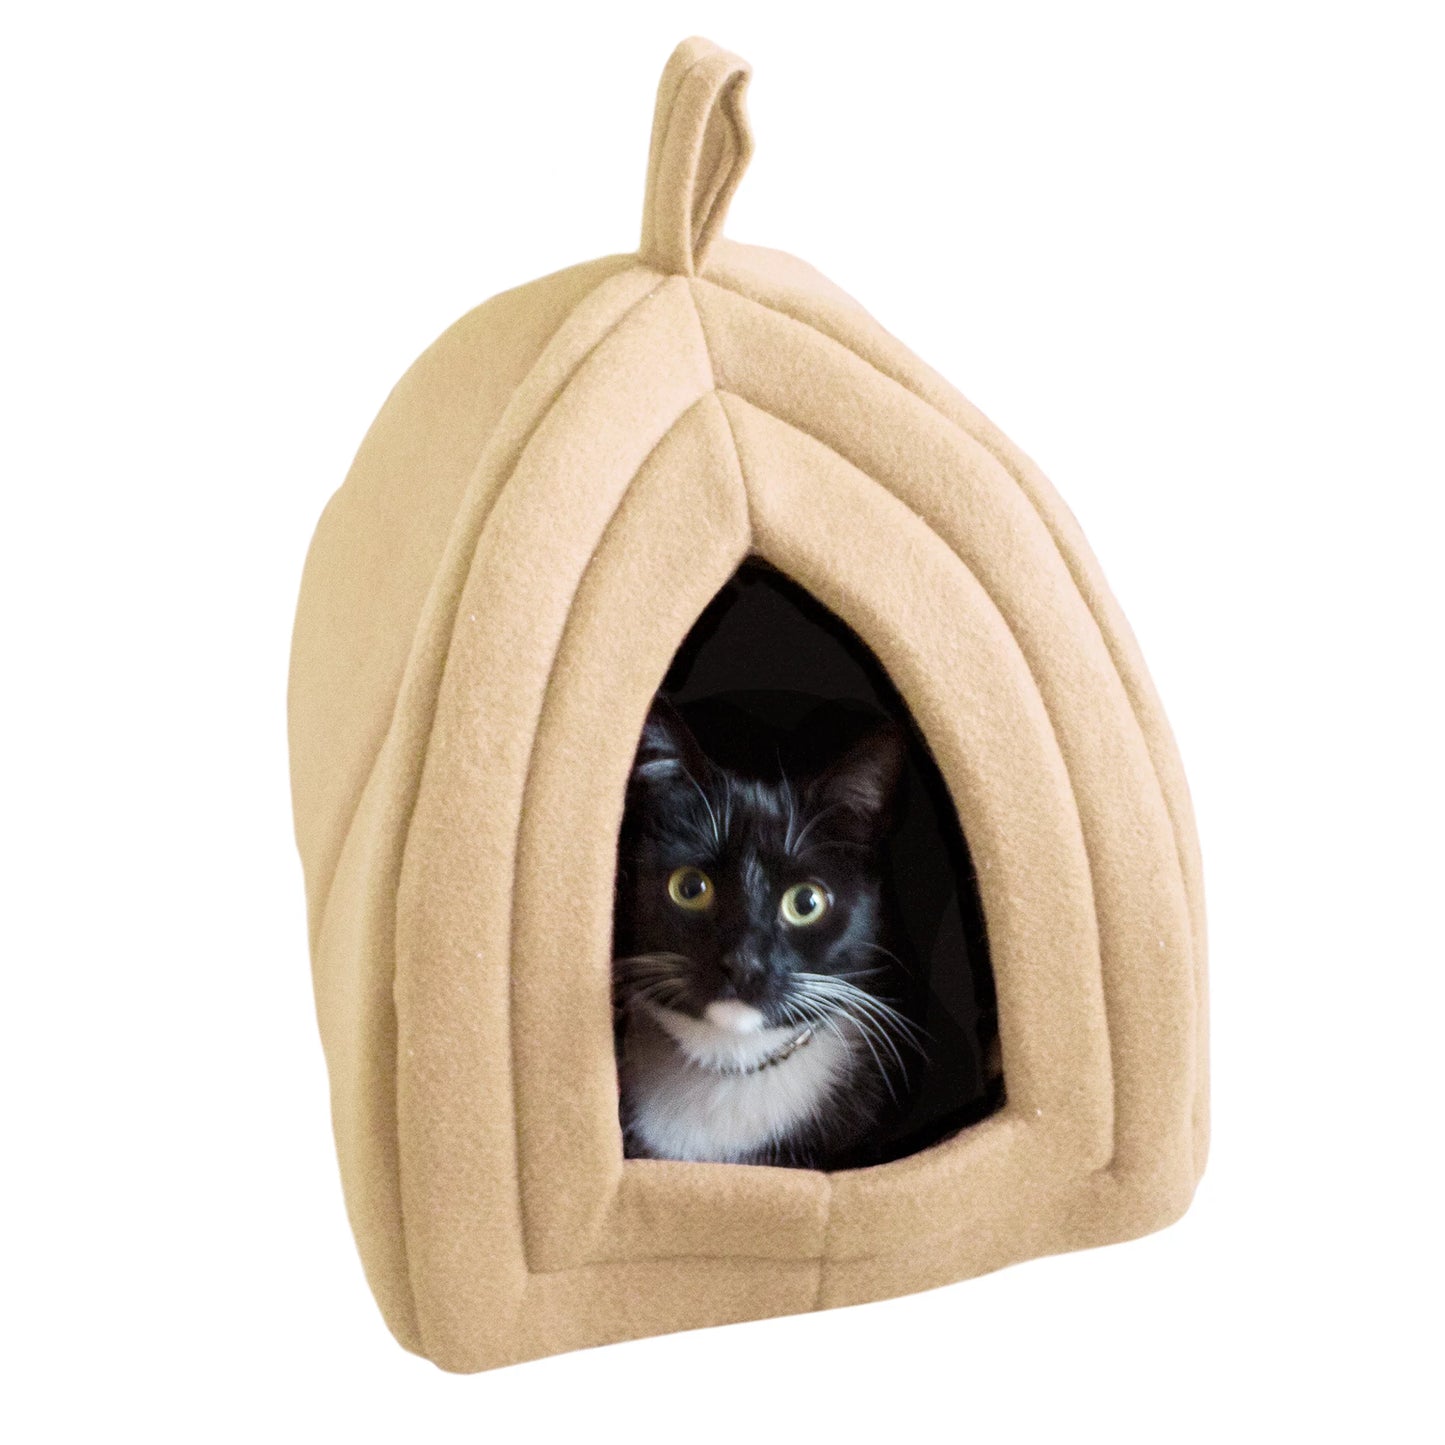 PETMAKER House Beds for Indoor Cats with Removable Foam Cushion Pet Tent for Kittens or Small Dogs up to 16 Lbs